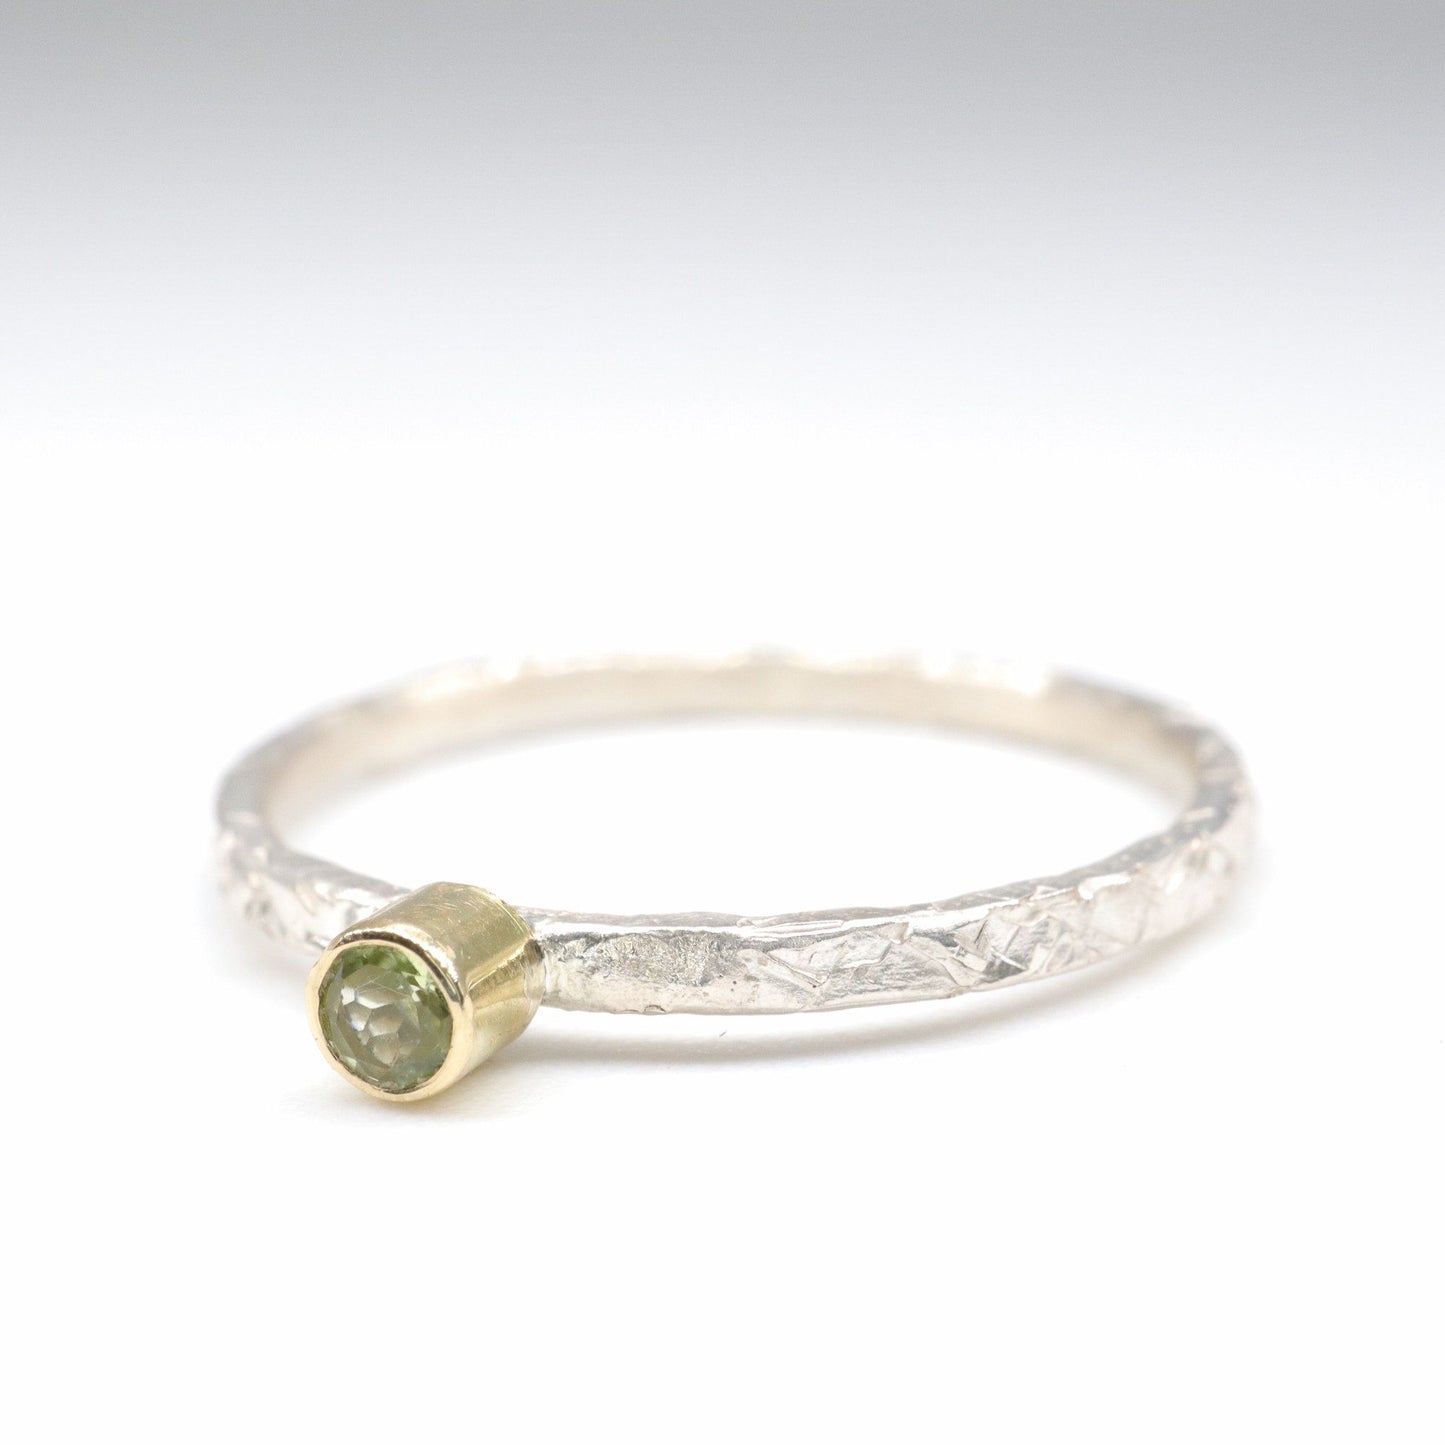 Peridot 18ct gold and silver stacking ring, Striding Edge design.